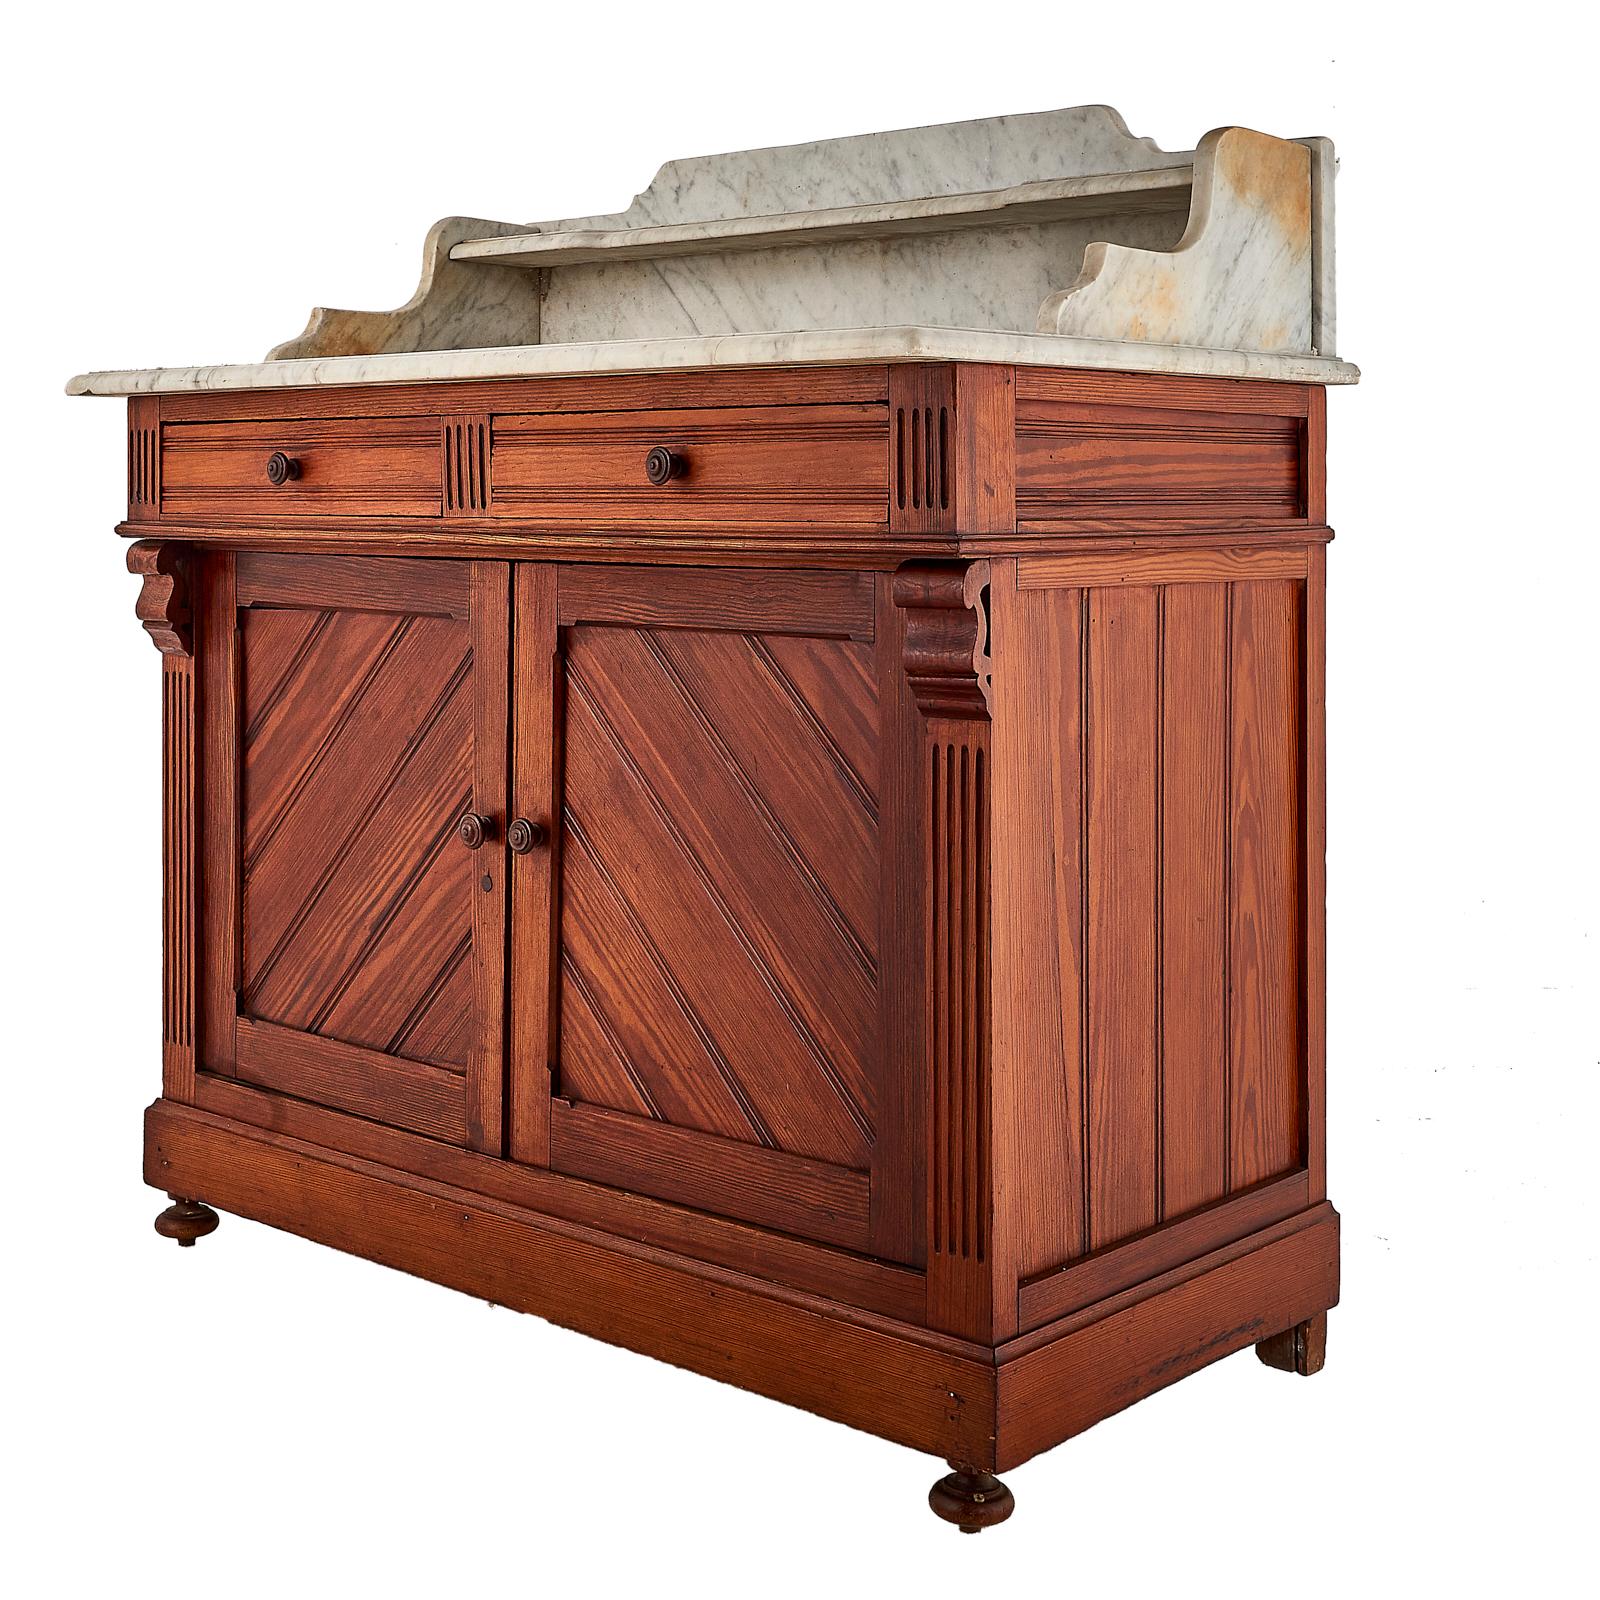 A French washstand in pitch pine, the two upper drawers above two-door cabinet, the carrara marble top with shelf at back, circa 1890.

Measures: 39.5? wide x 22? deep x 31? tall (41? tall at back).

